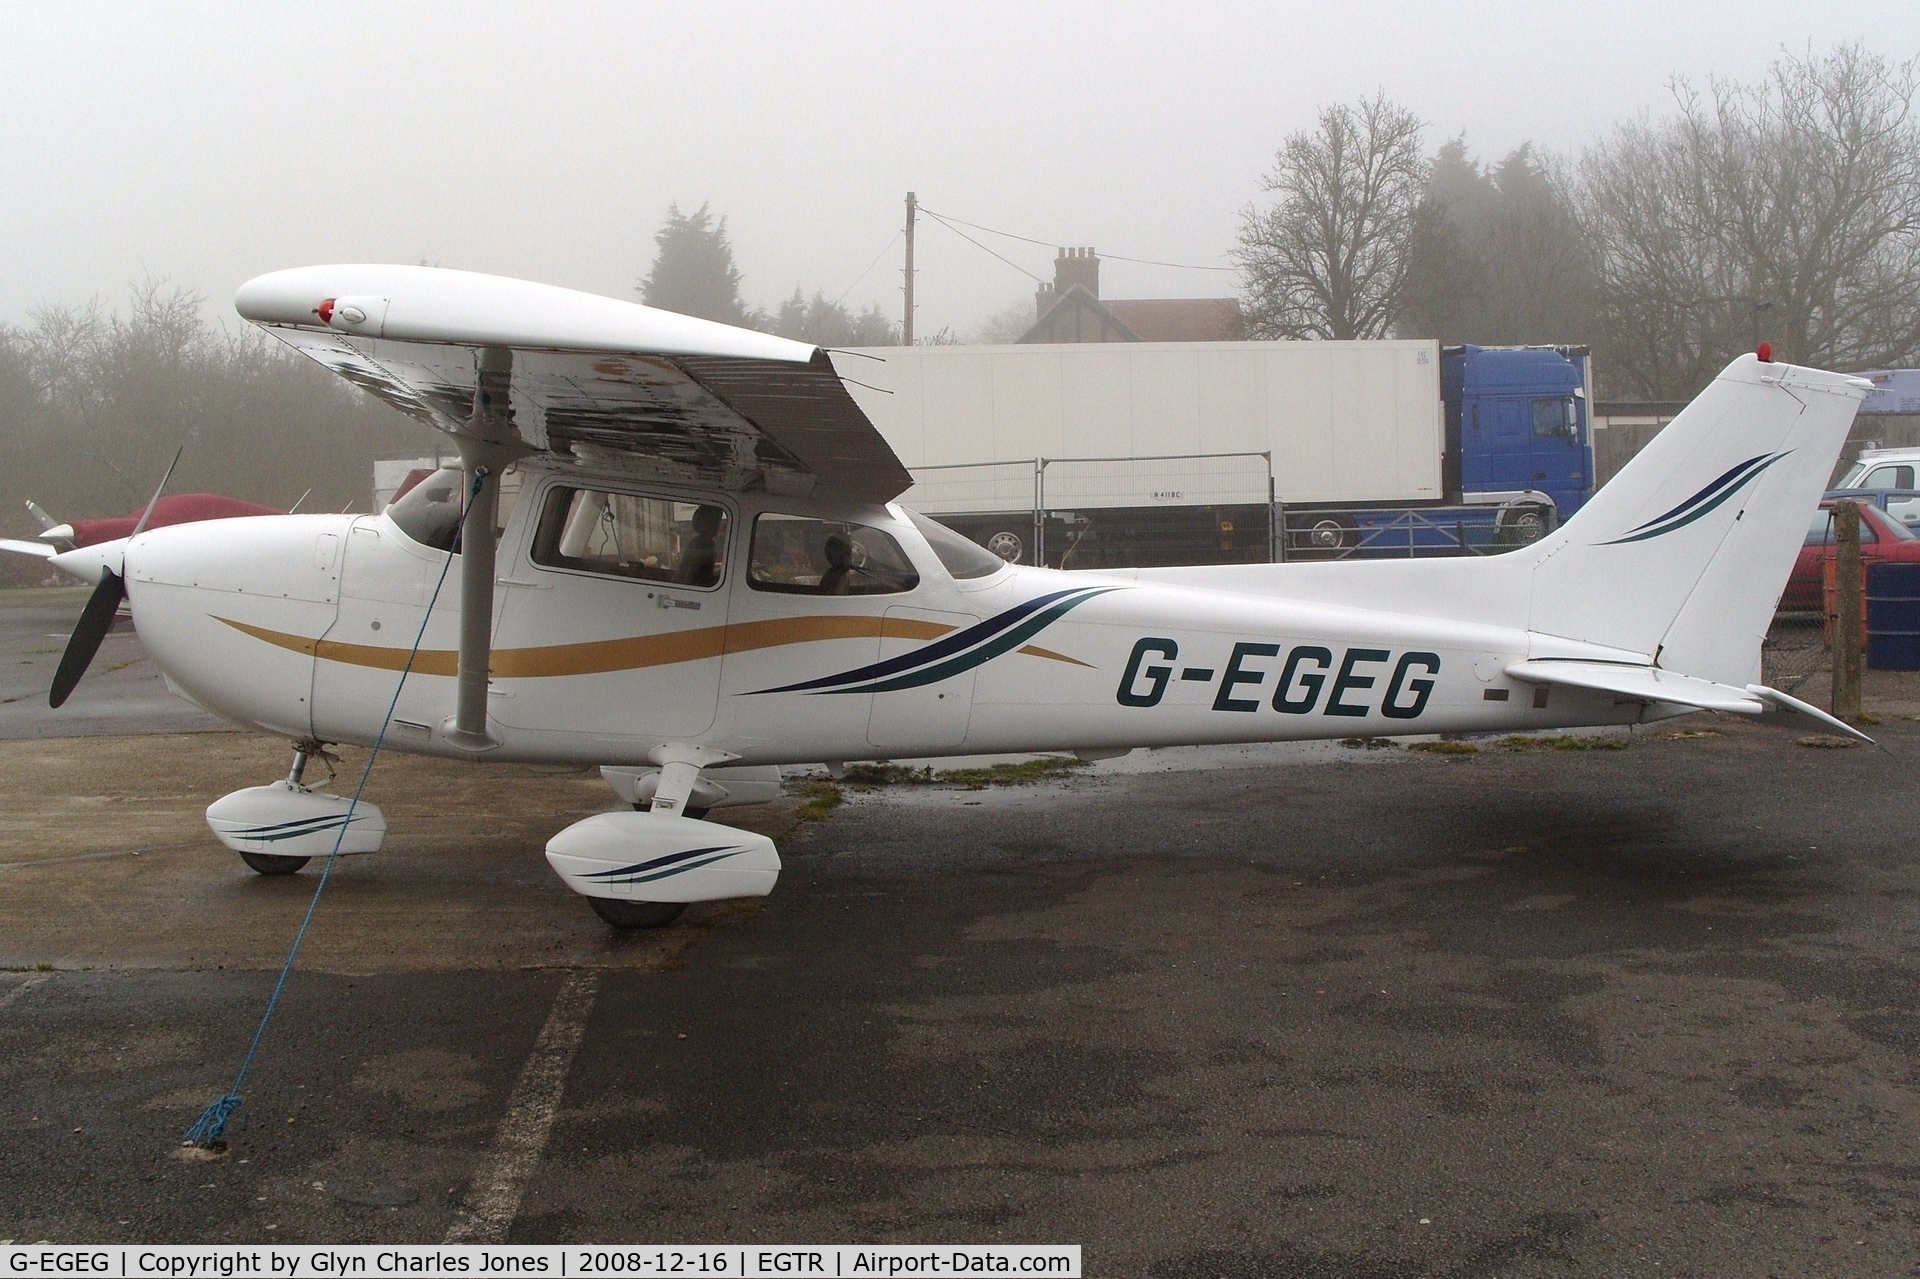 G-EGEG, 2000 Cessna 172R C/N 17280894, Taken on a quiet cold and foggy day. With thanks to Elstree control tower who granted me authority to take photographs on the aerodrome. Previously N7262H.